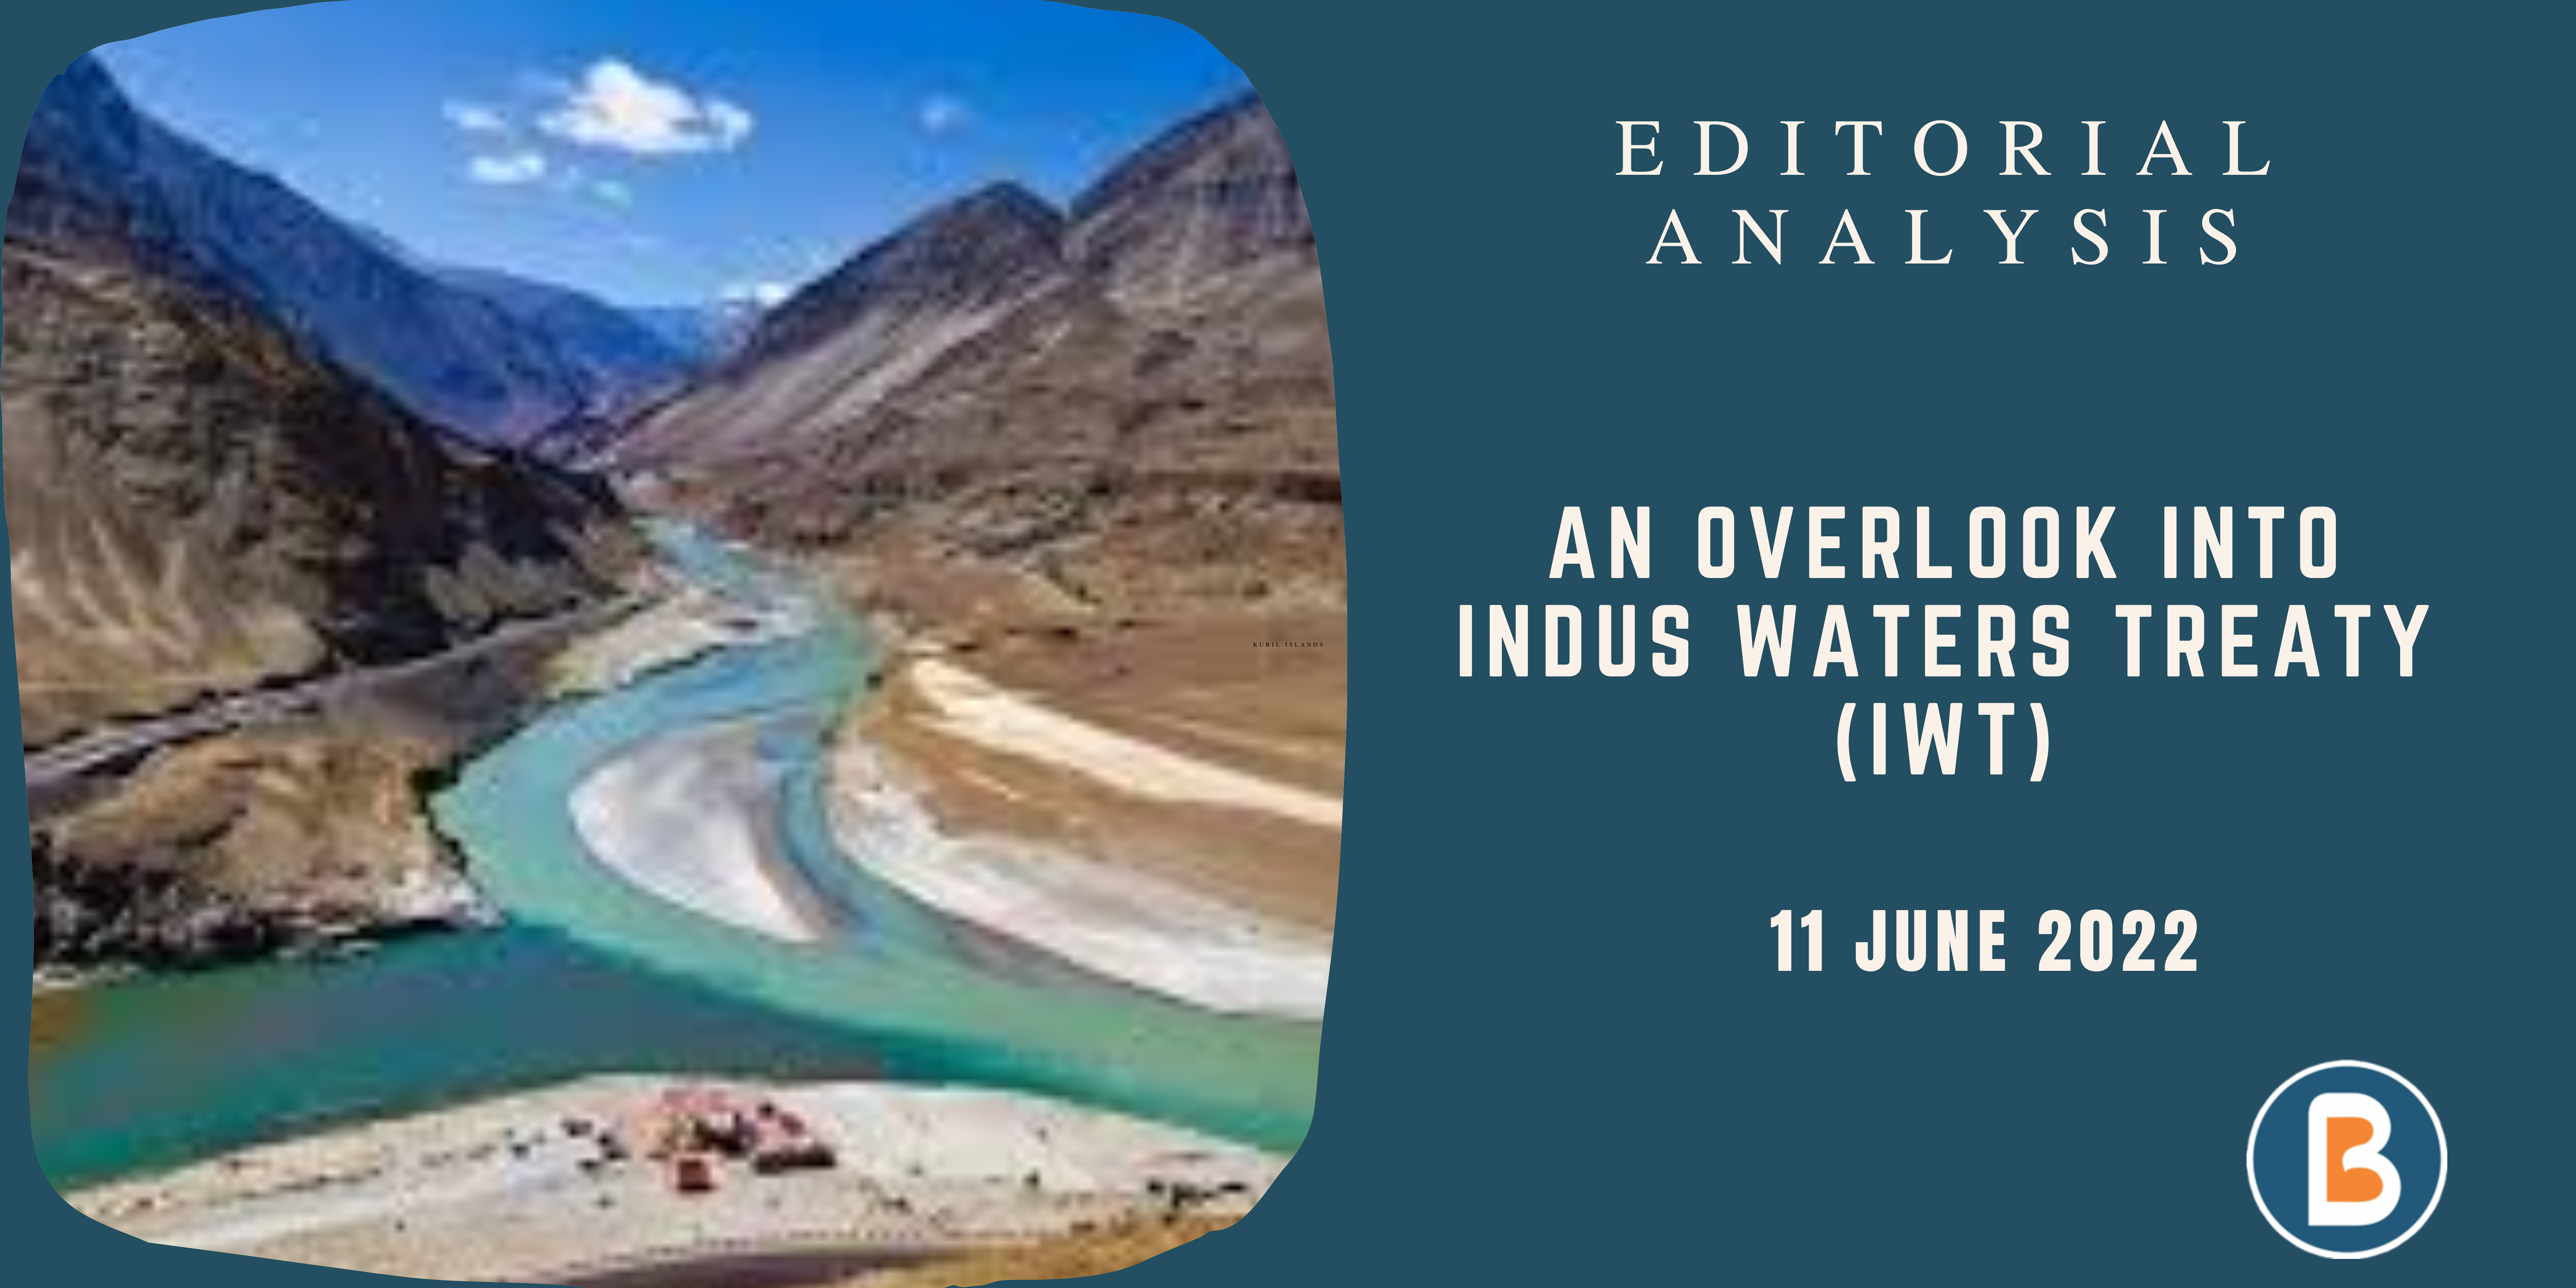 Editorial Analysis for UPSC - An Overlook into Indus Waters Treaty (IWT)